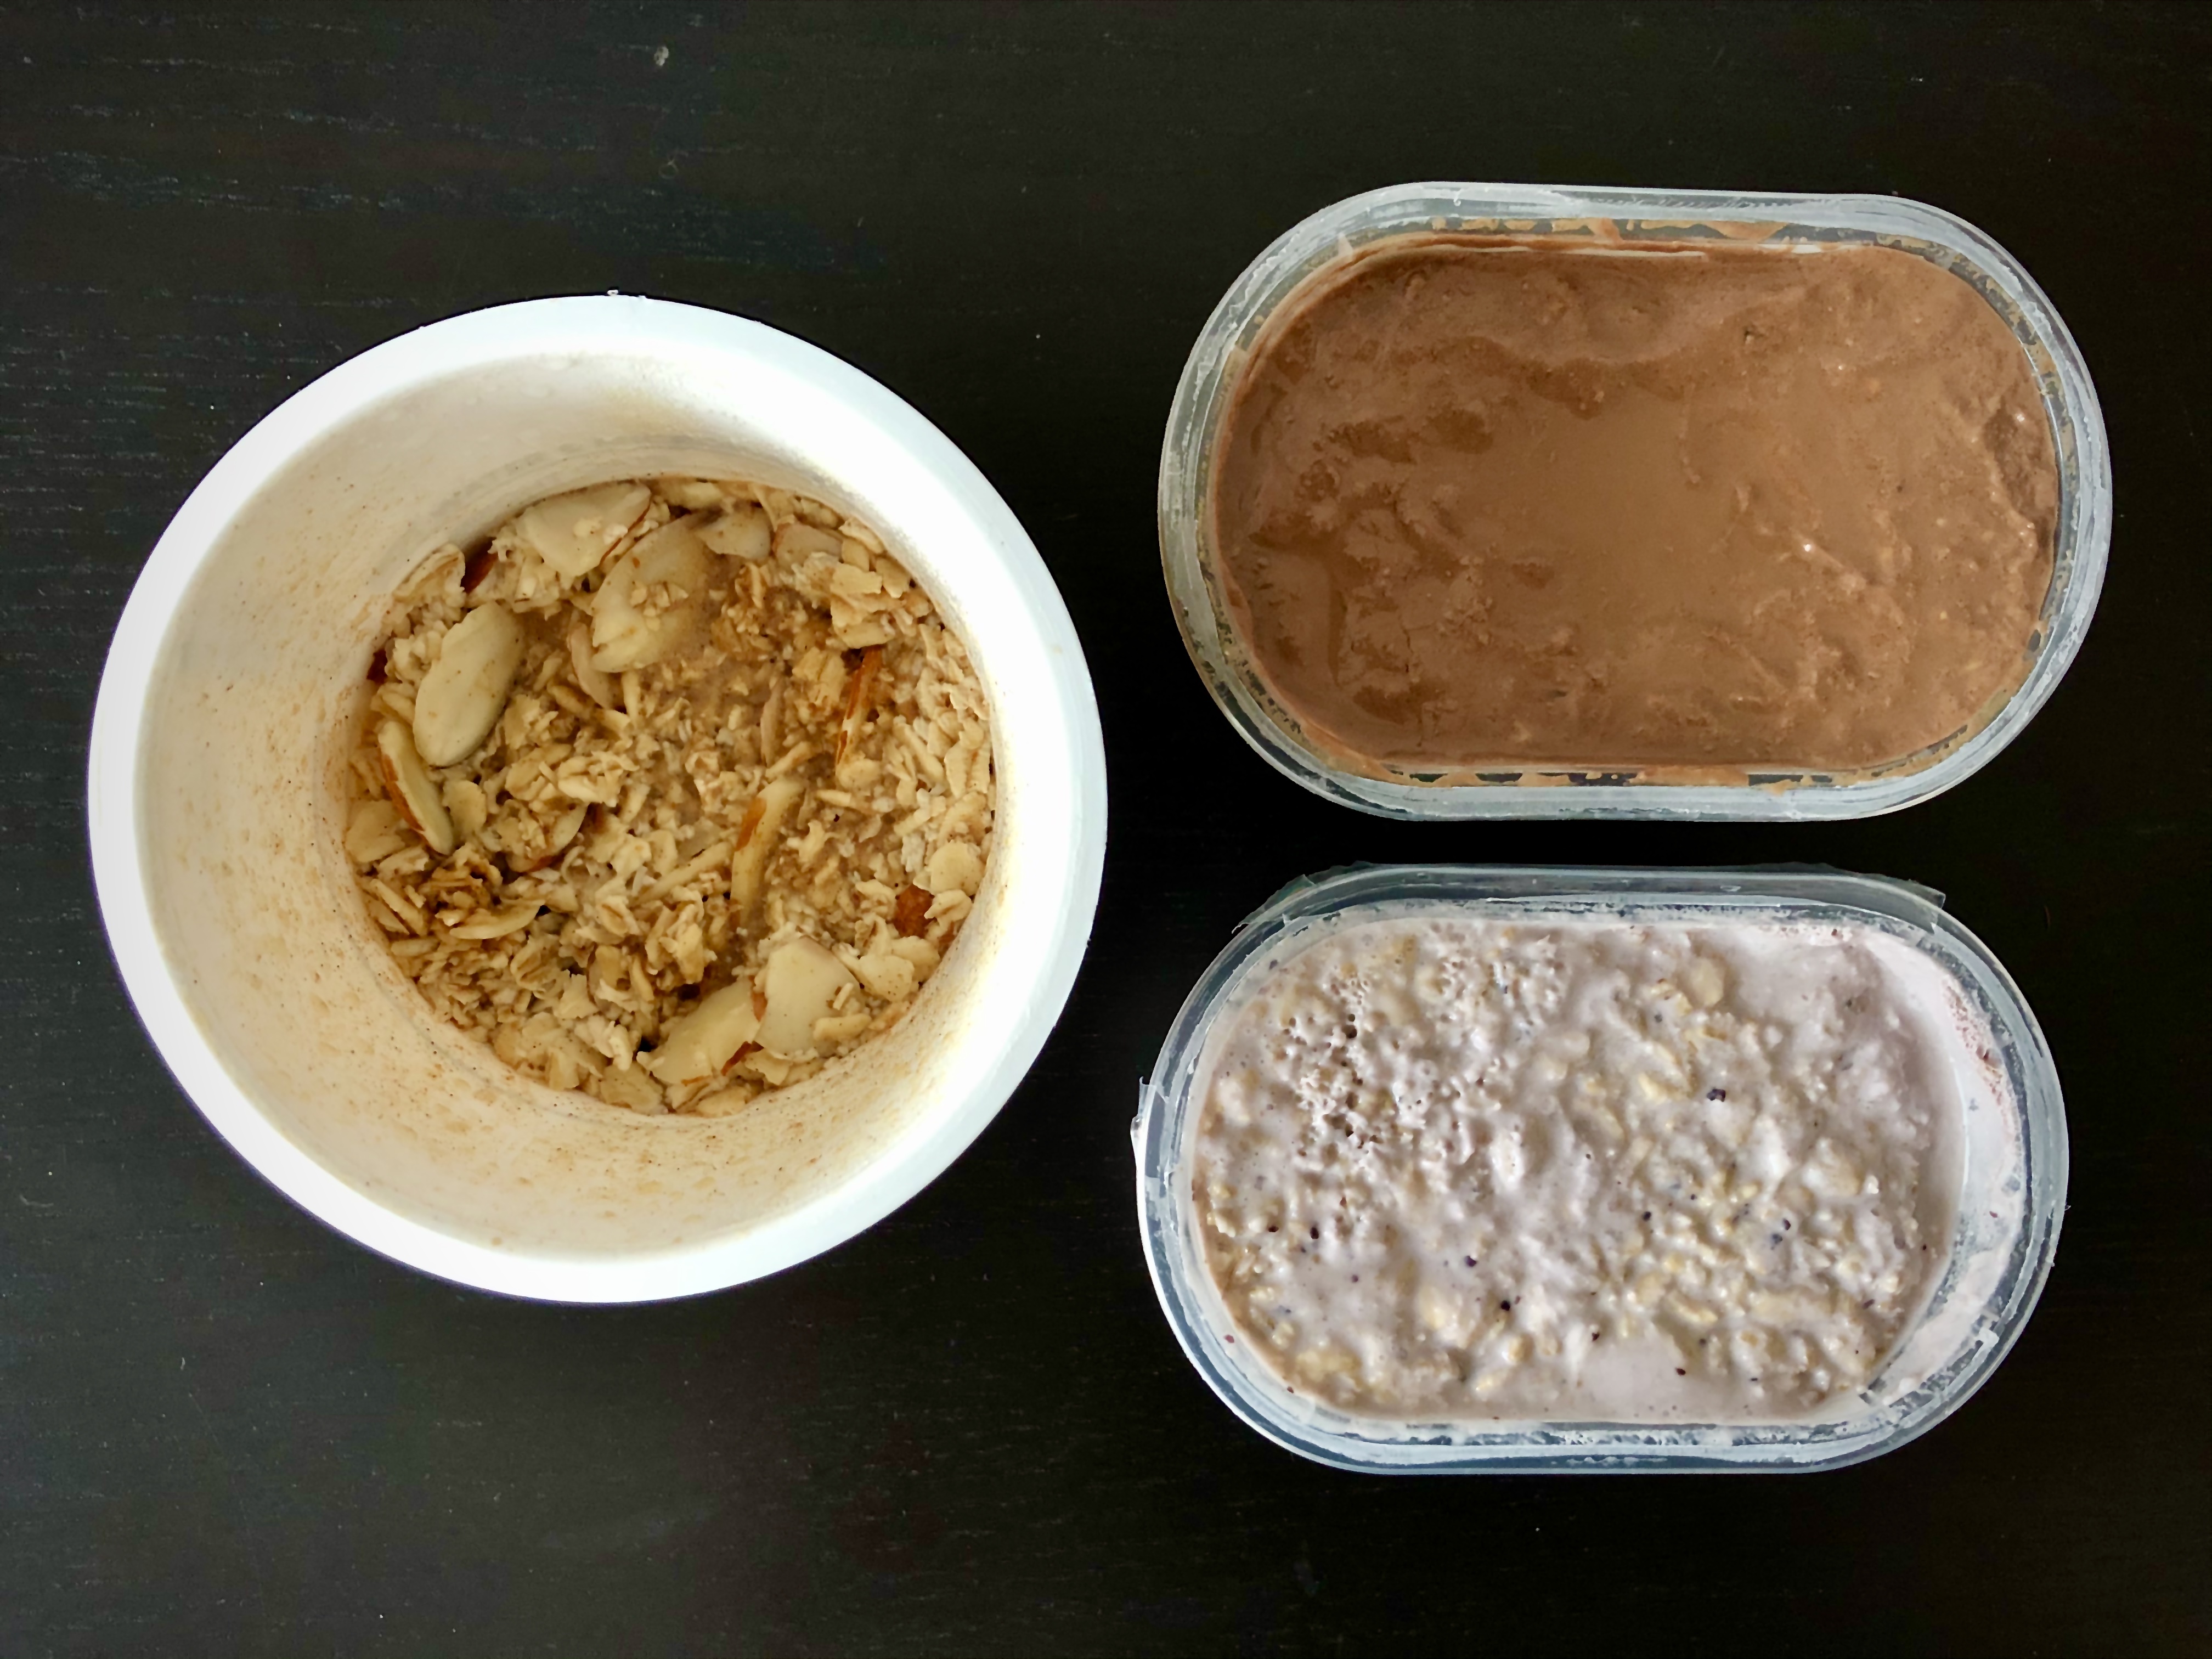 A circular container of overnight oats sits next to two rectangular containers of overnight oats, one purple and one brown.